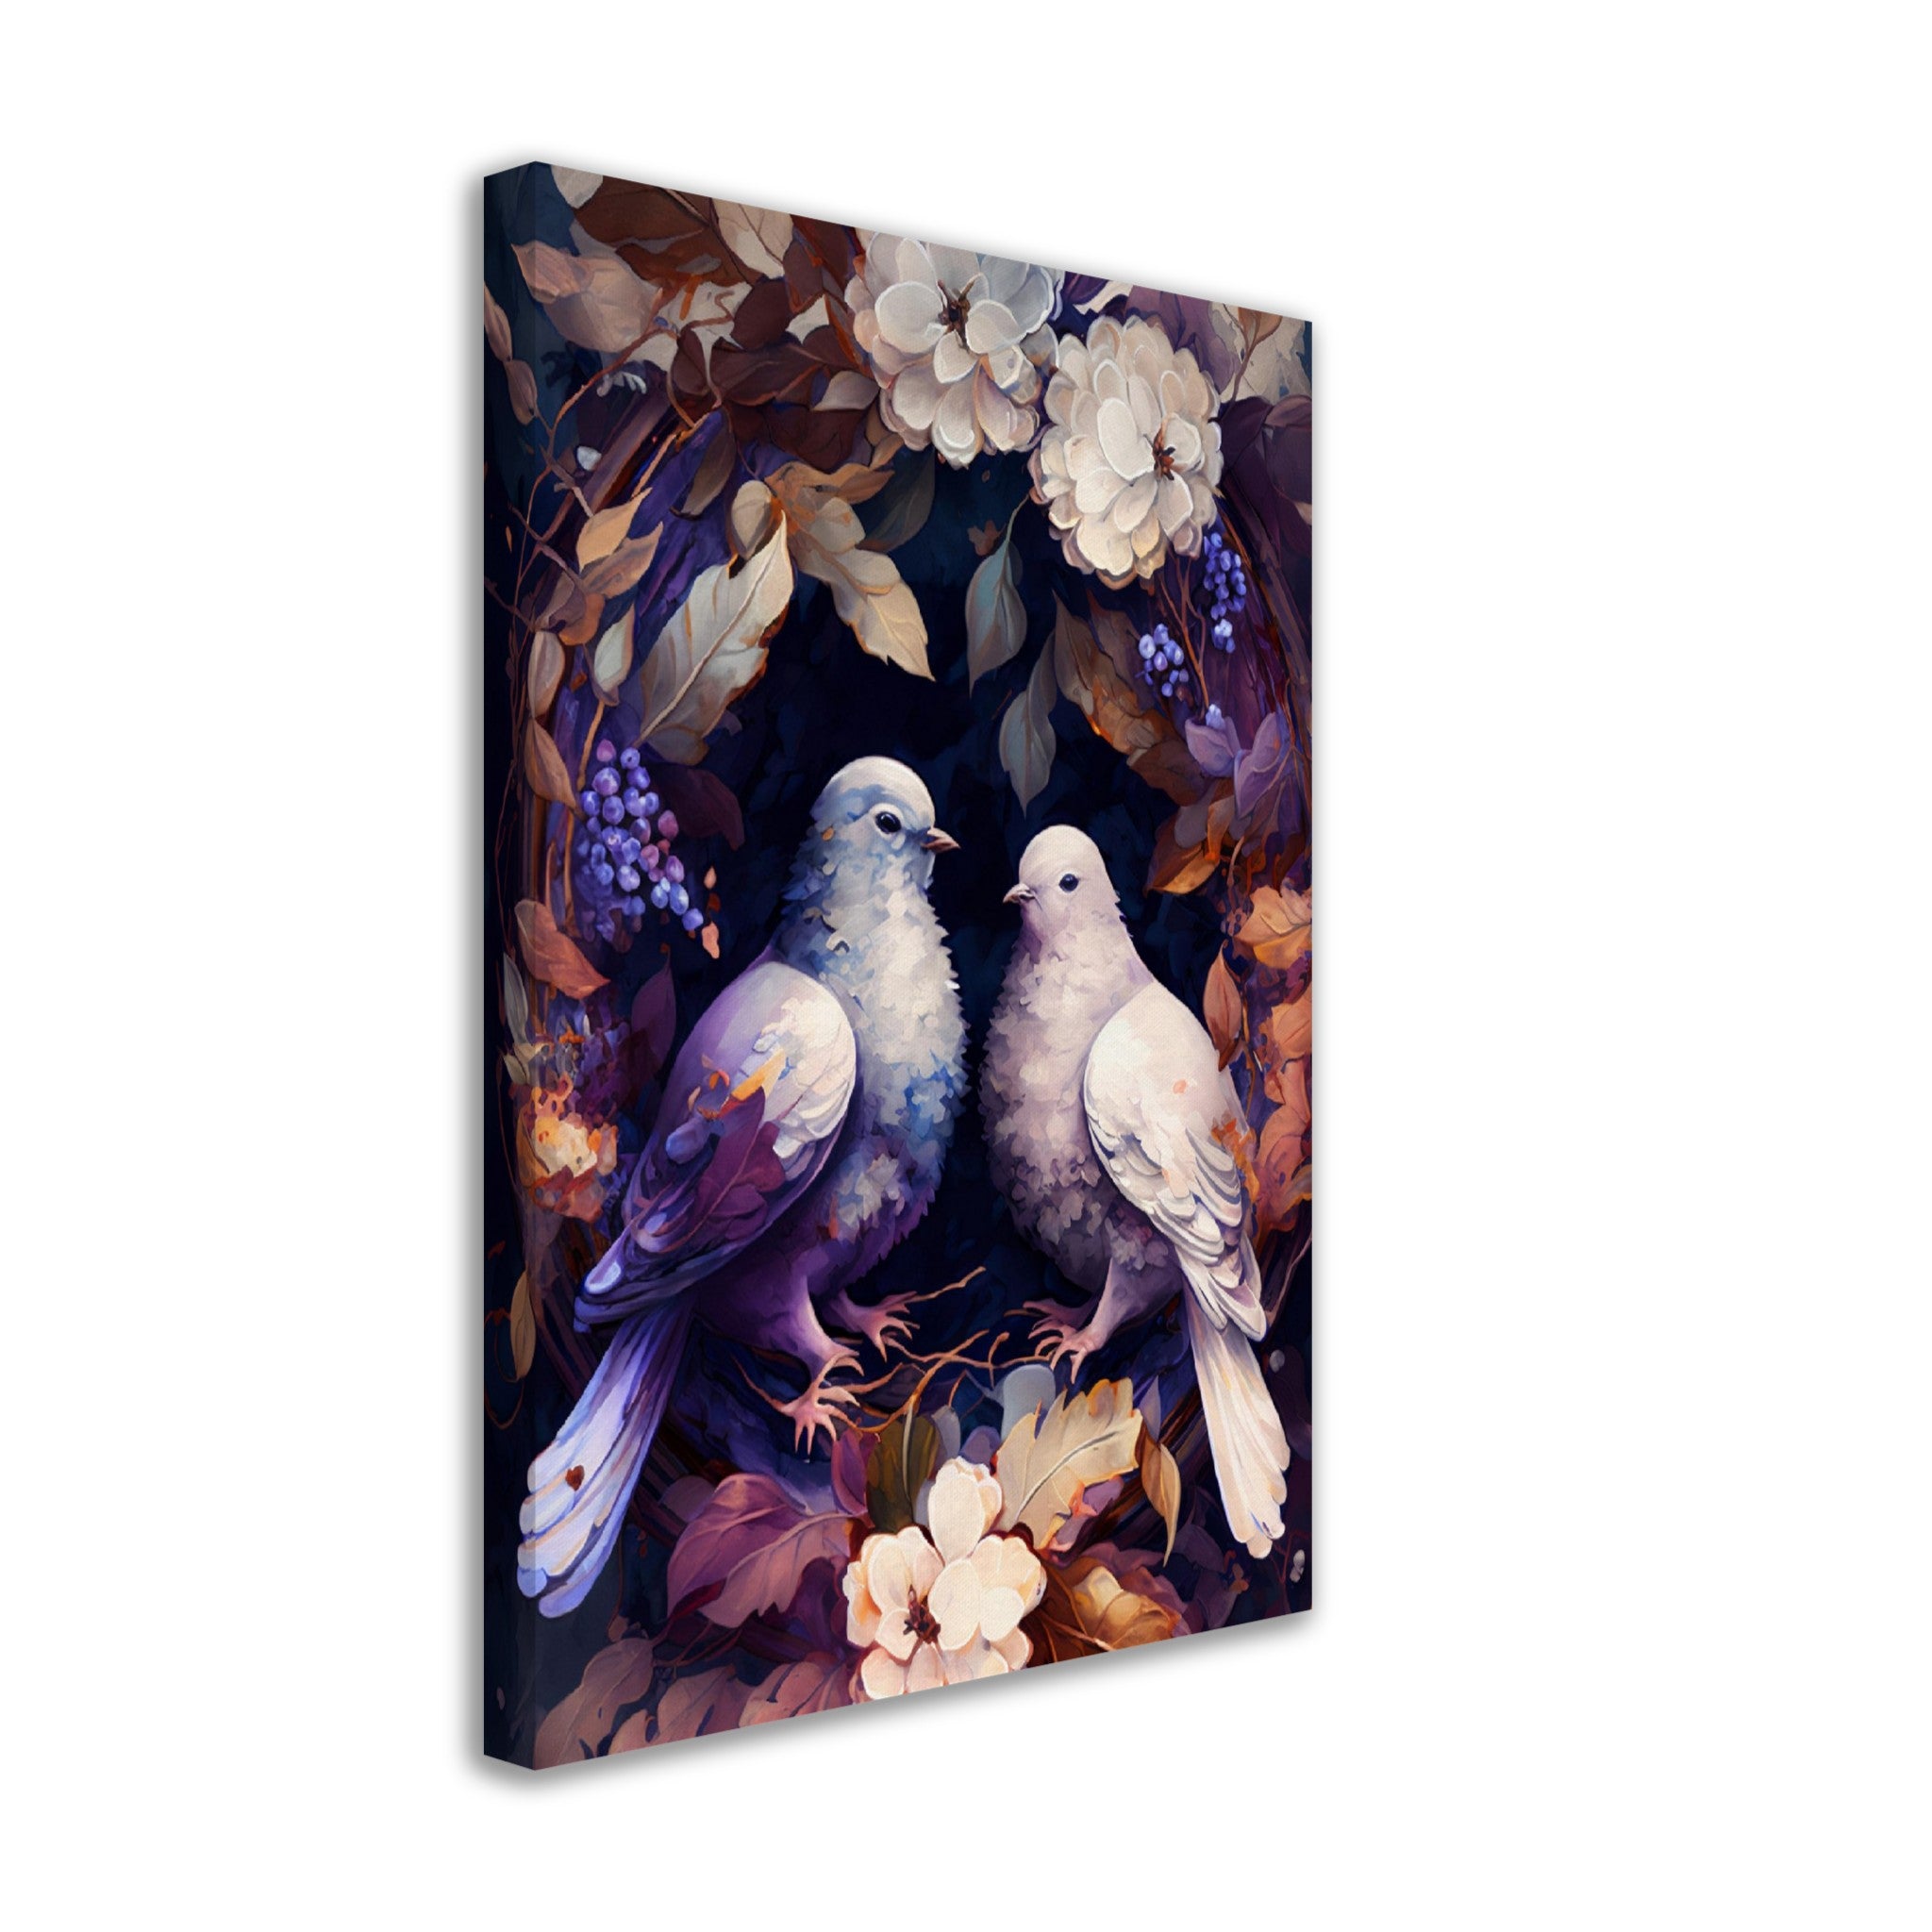 Two Doves Surrounded By Flowers - immersiarts